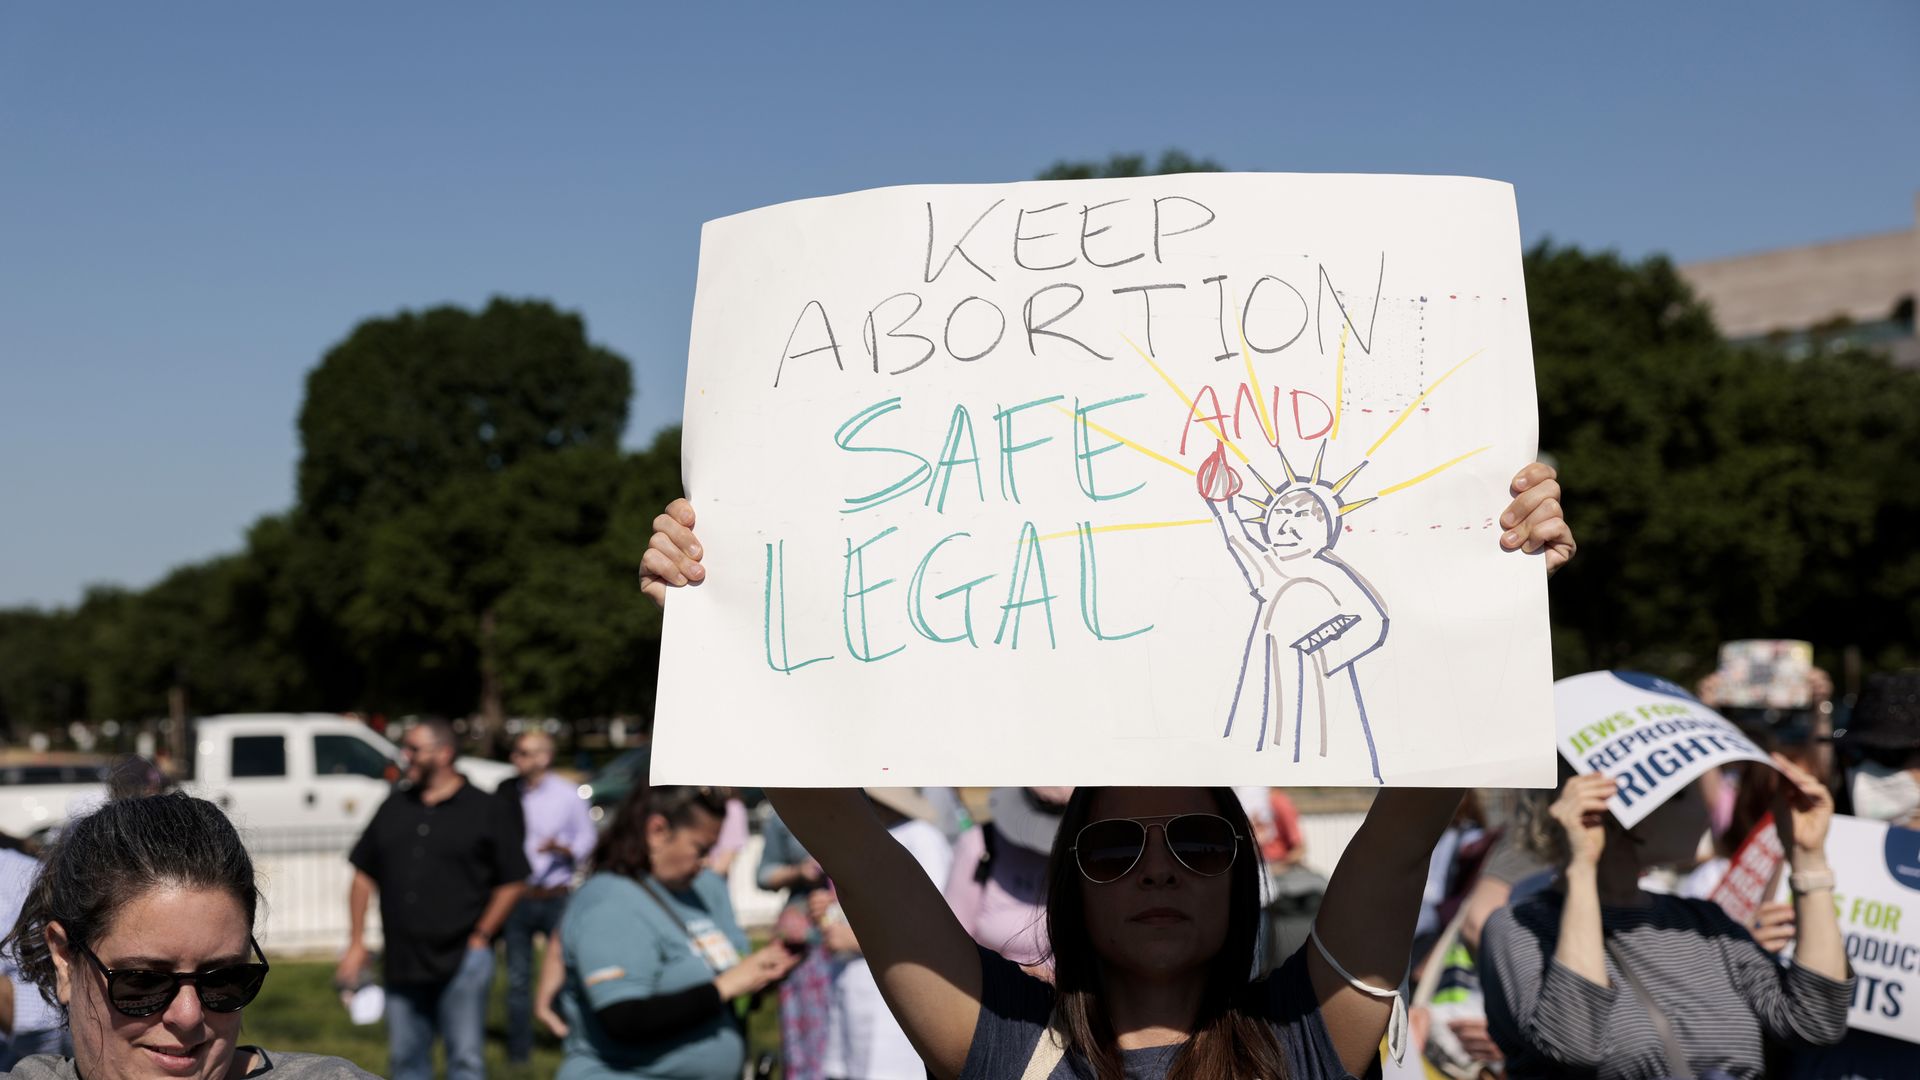 Picture of a person holding a sign that says "keep abortion safe and legal"